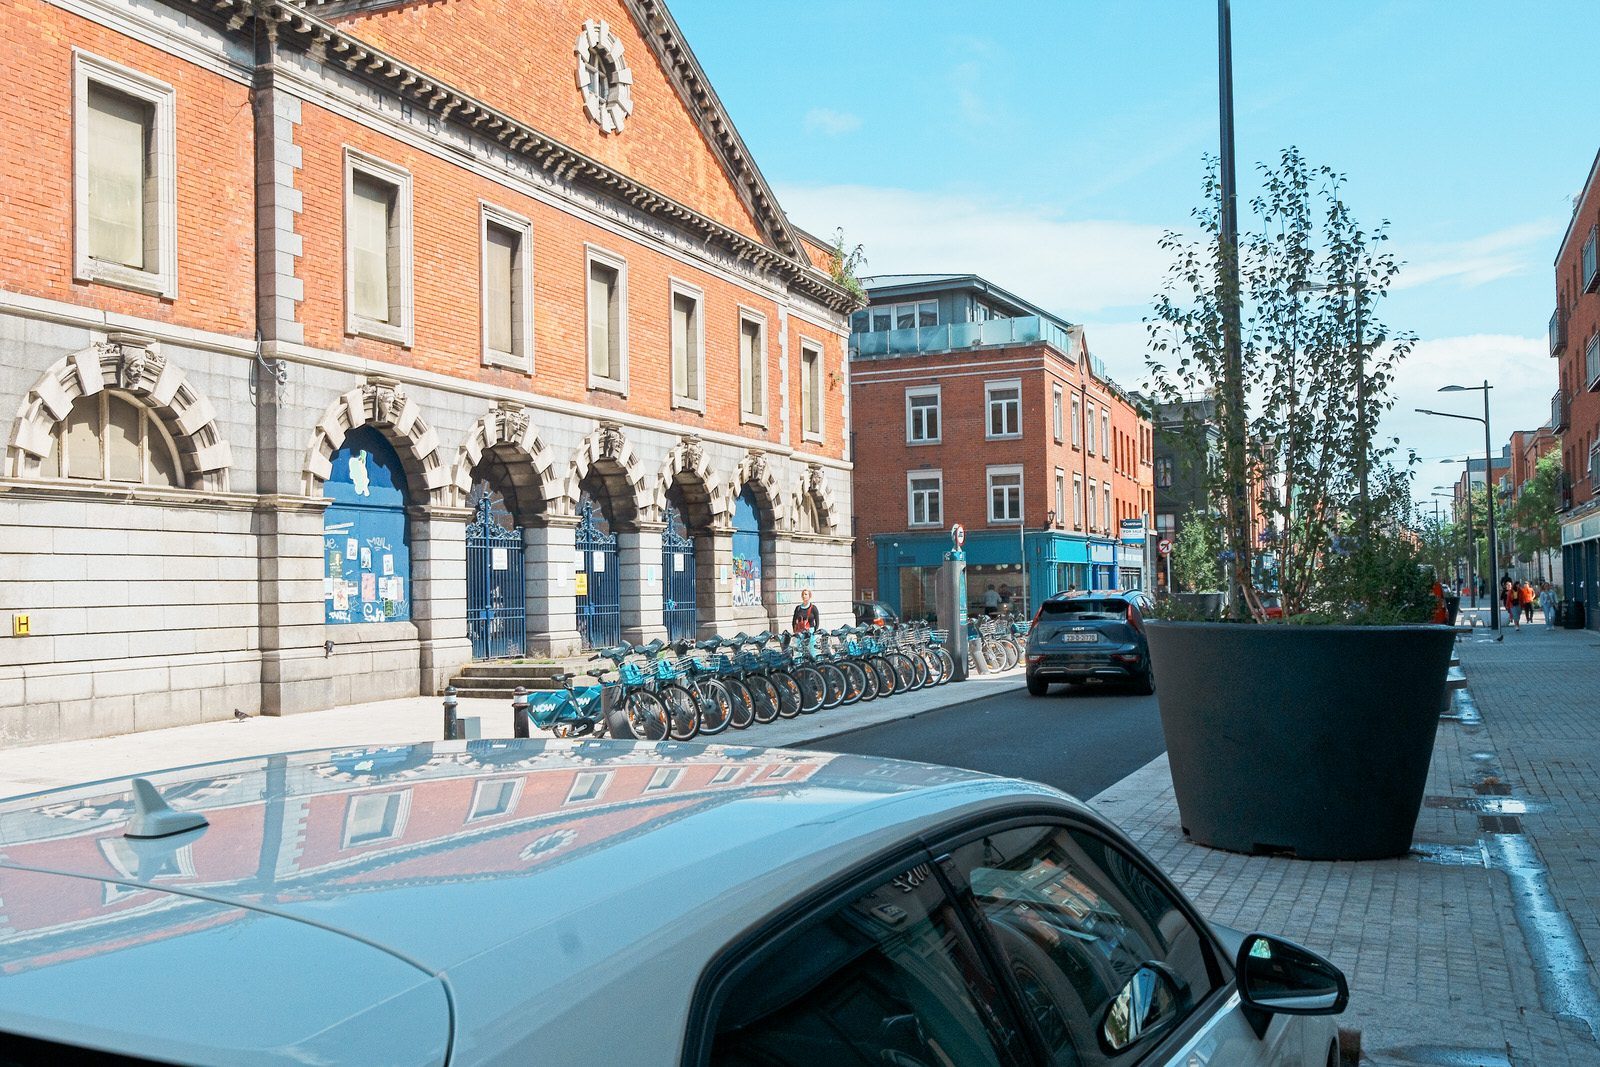 DUBLINBIKES DOCKING STATION 73 [AT THE OLD IVEAGH MARKETS BUILDING ON FRANCIS STREET] 003